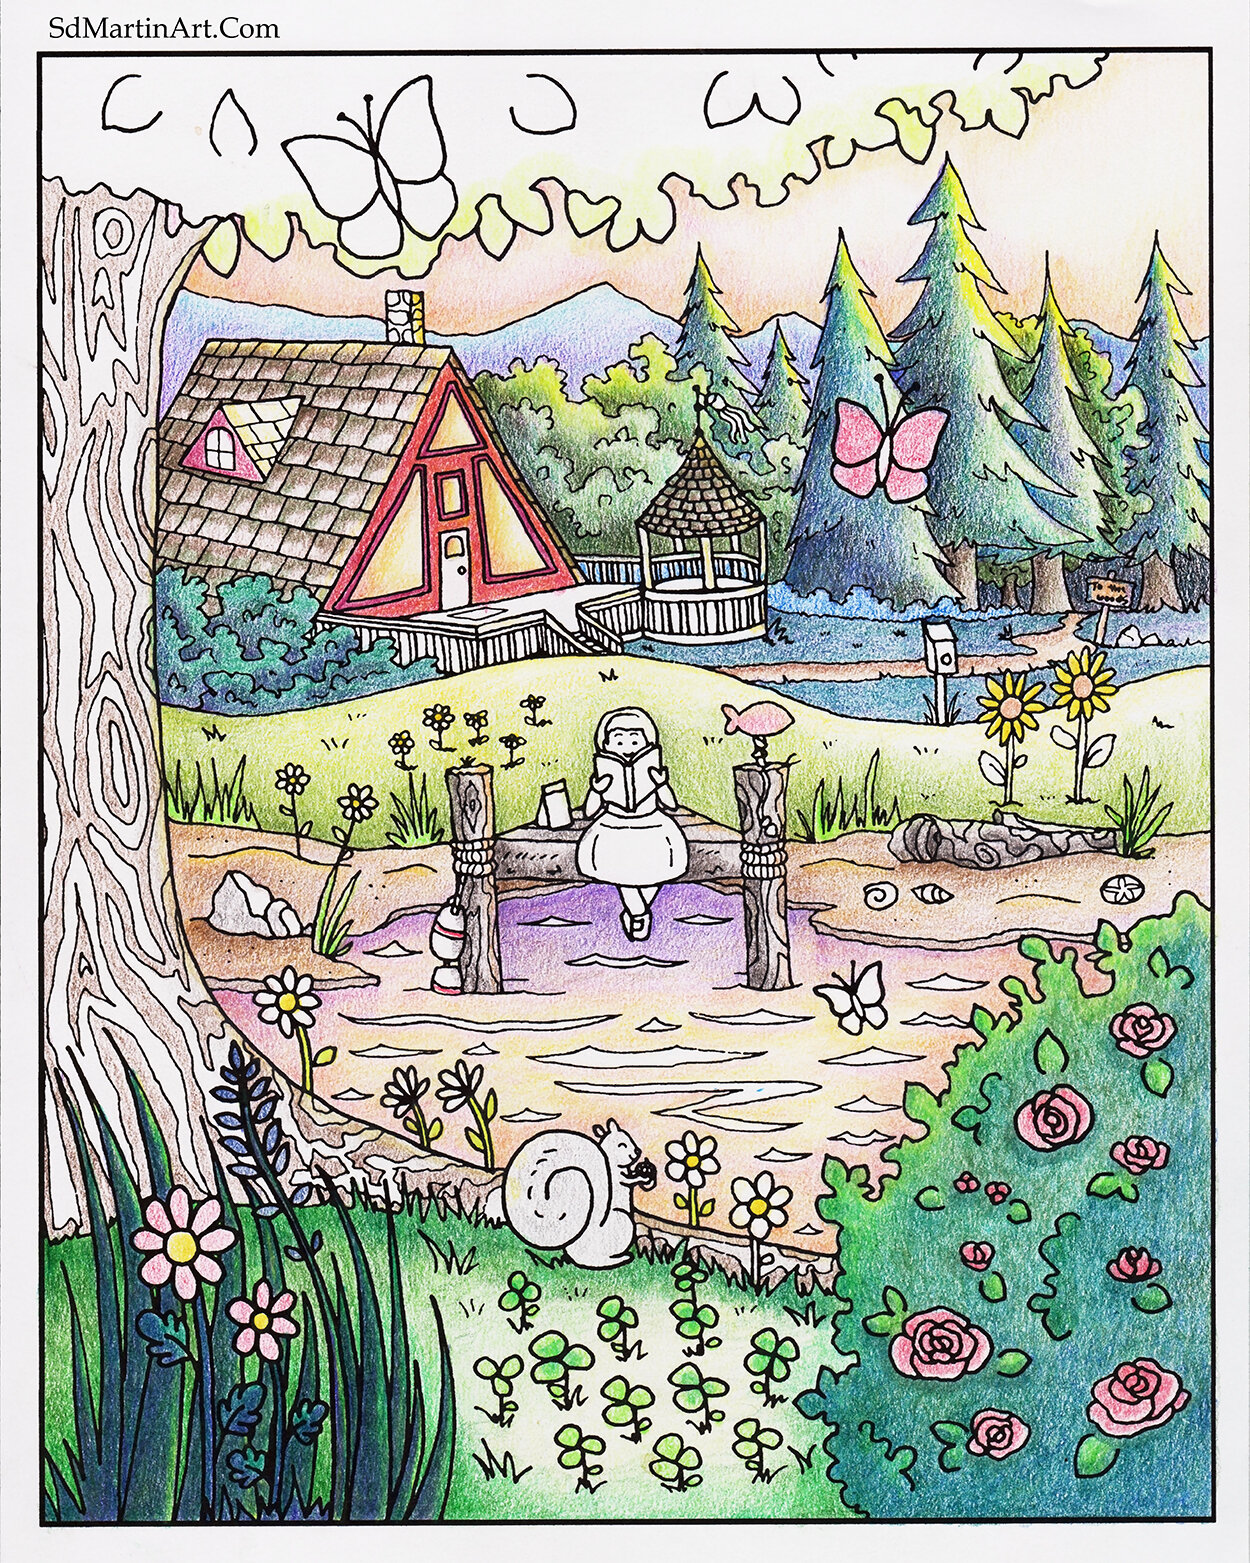 Free Coloring Page_A Frame Cottage_Coloring Progress 4 _color scan_Edited LR with WM.jpg